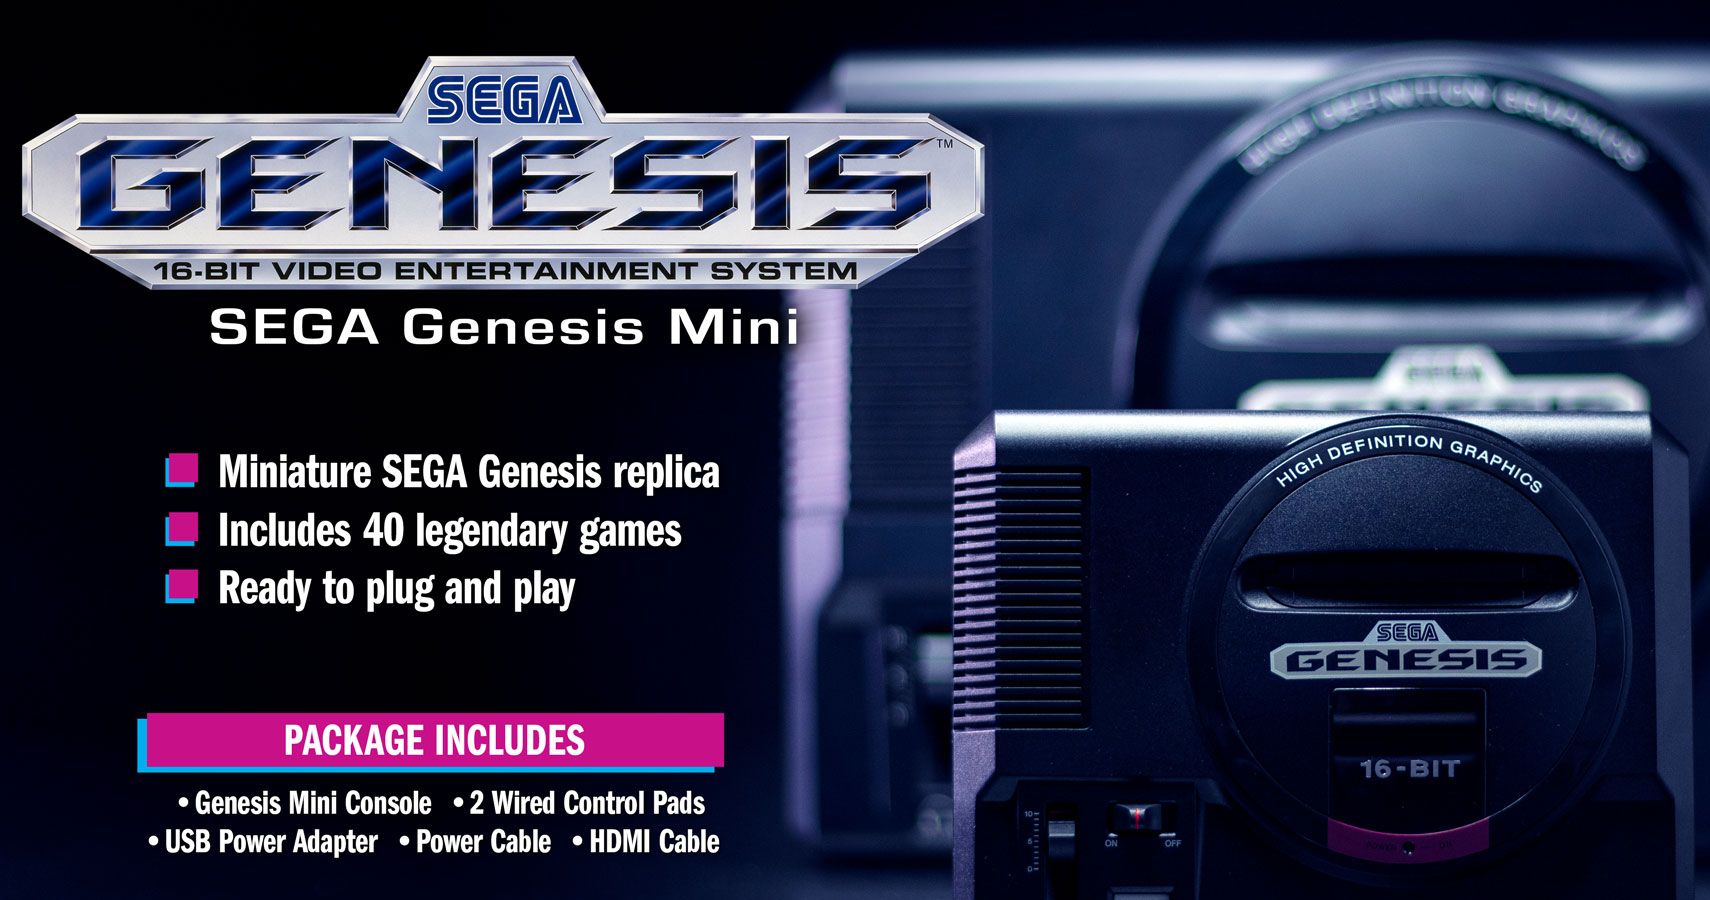 Sega Genesis Mini Trailer Wants Us To Know That It Does